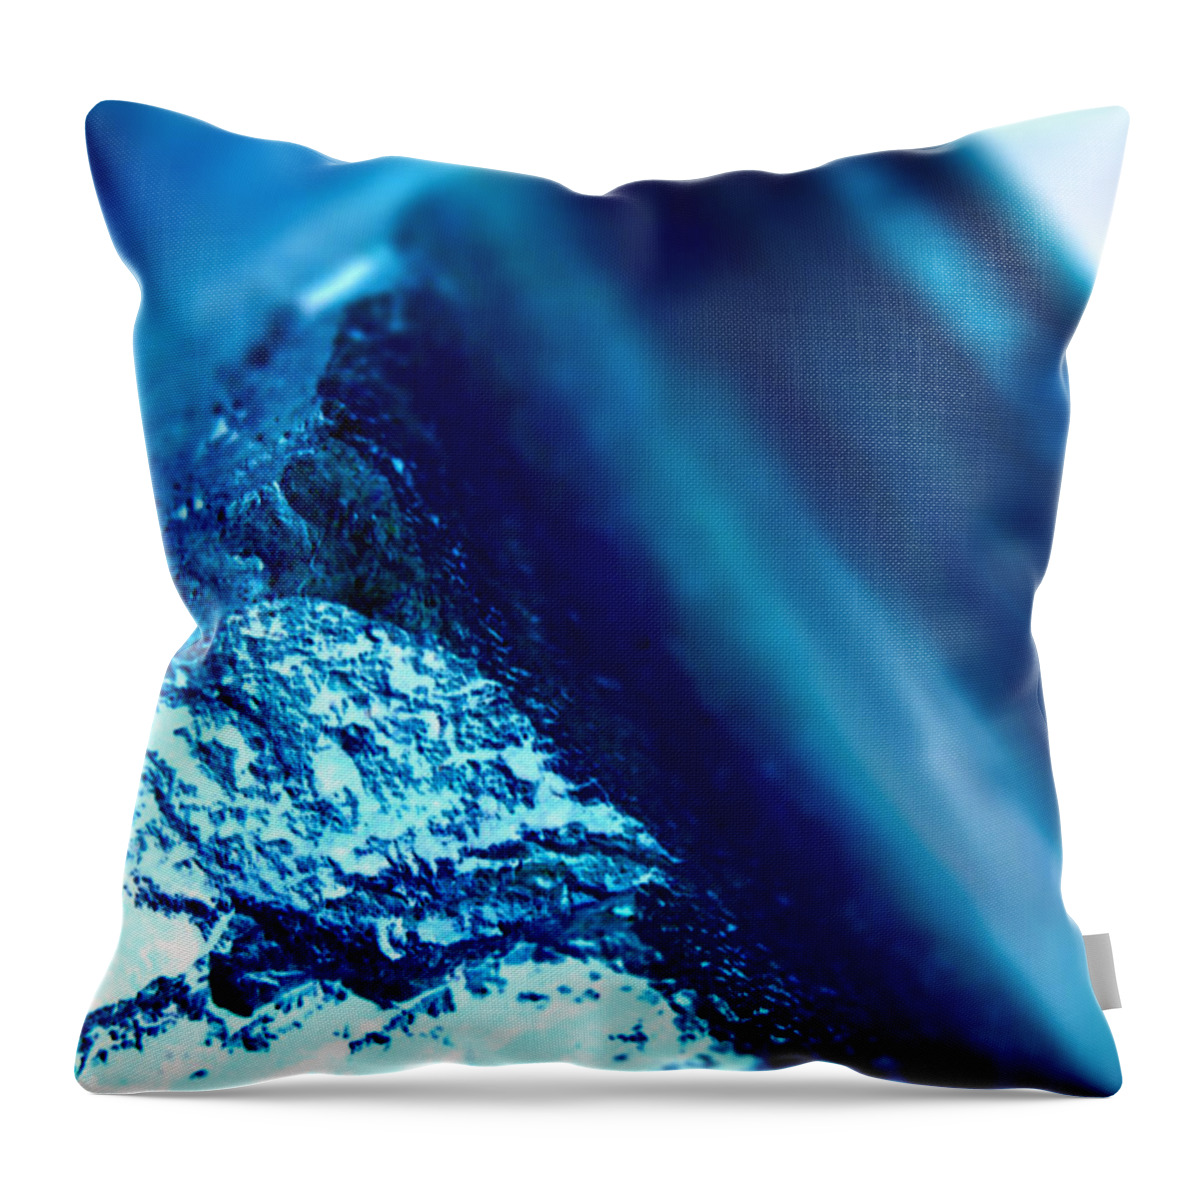 Landscape Throw Pillow featuring the photograph Blue Peak by Morgan Carter